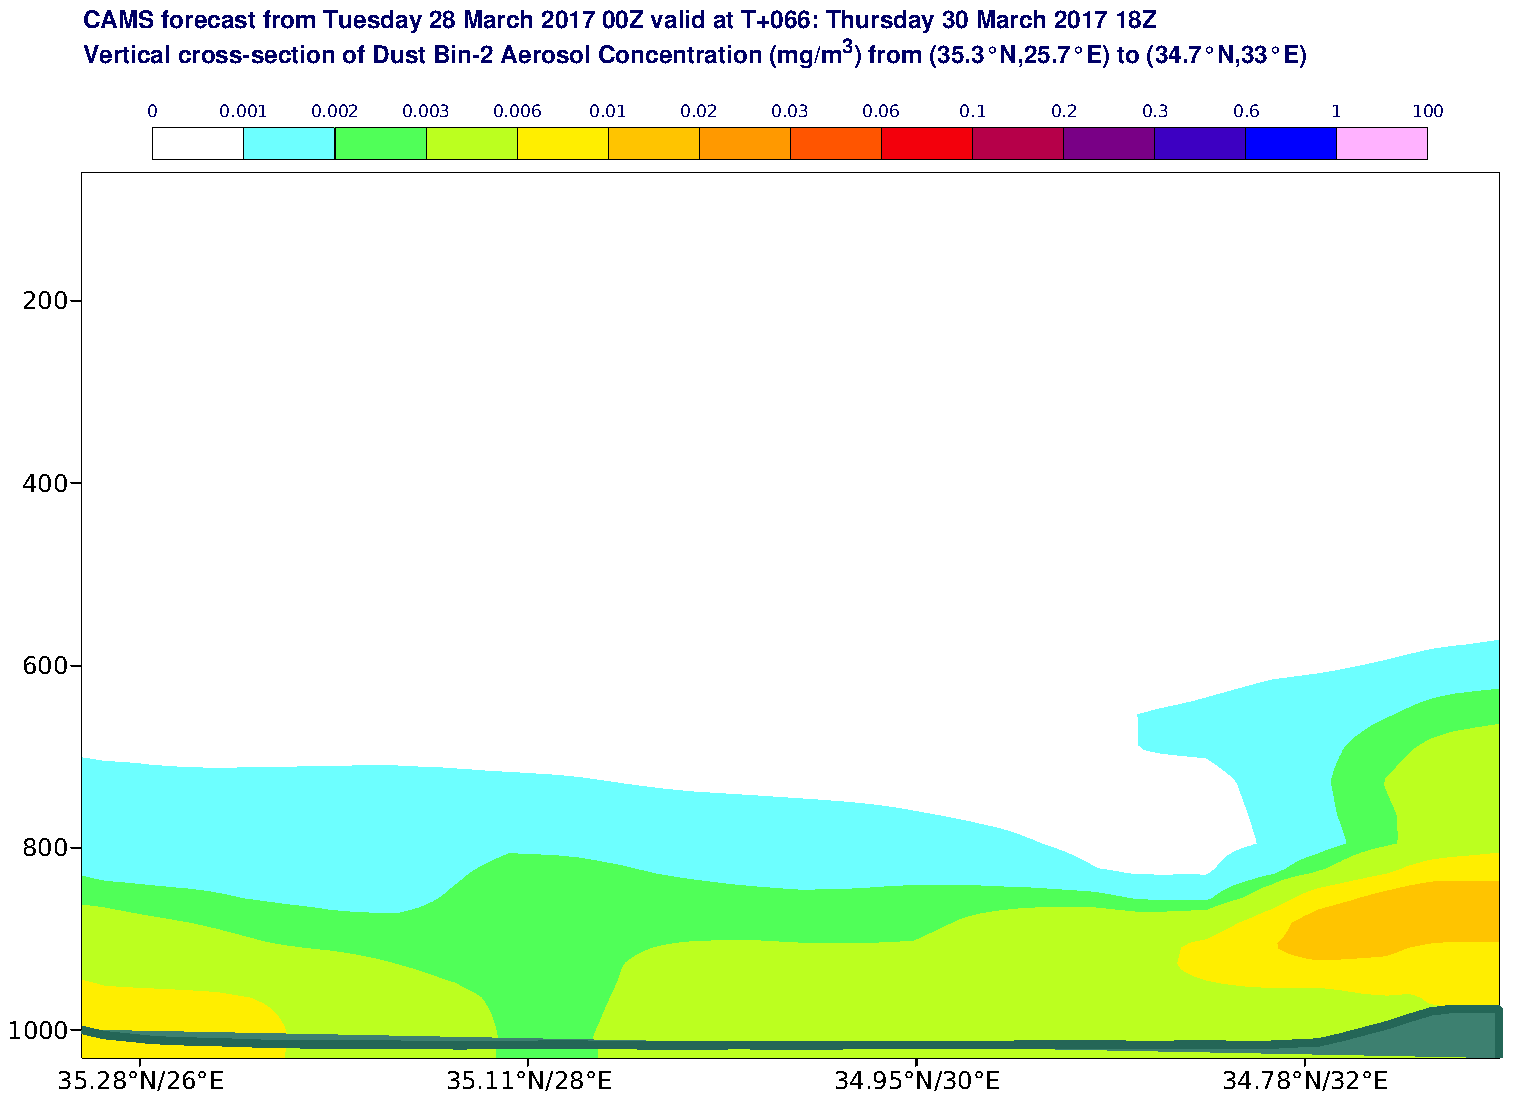 Vertical cross-section of Dust Bin-2 Aerosol Concentration (mg/m3) valid at T66 - 2017-03-30 18:00